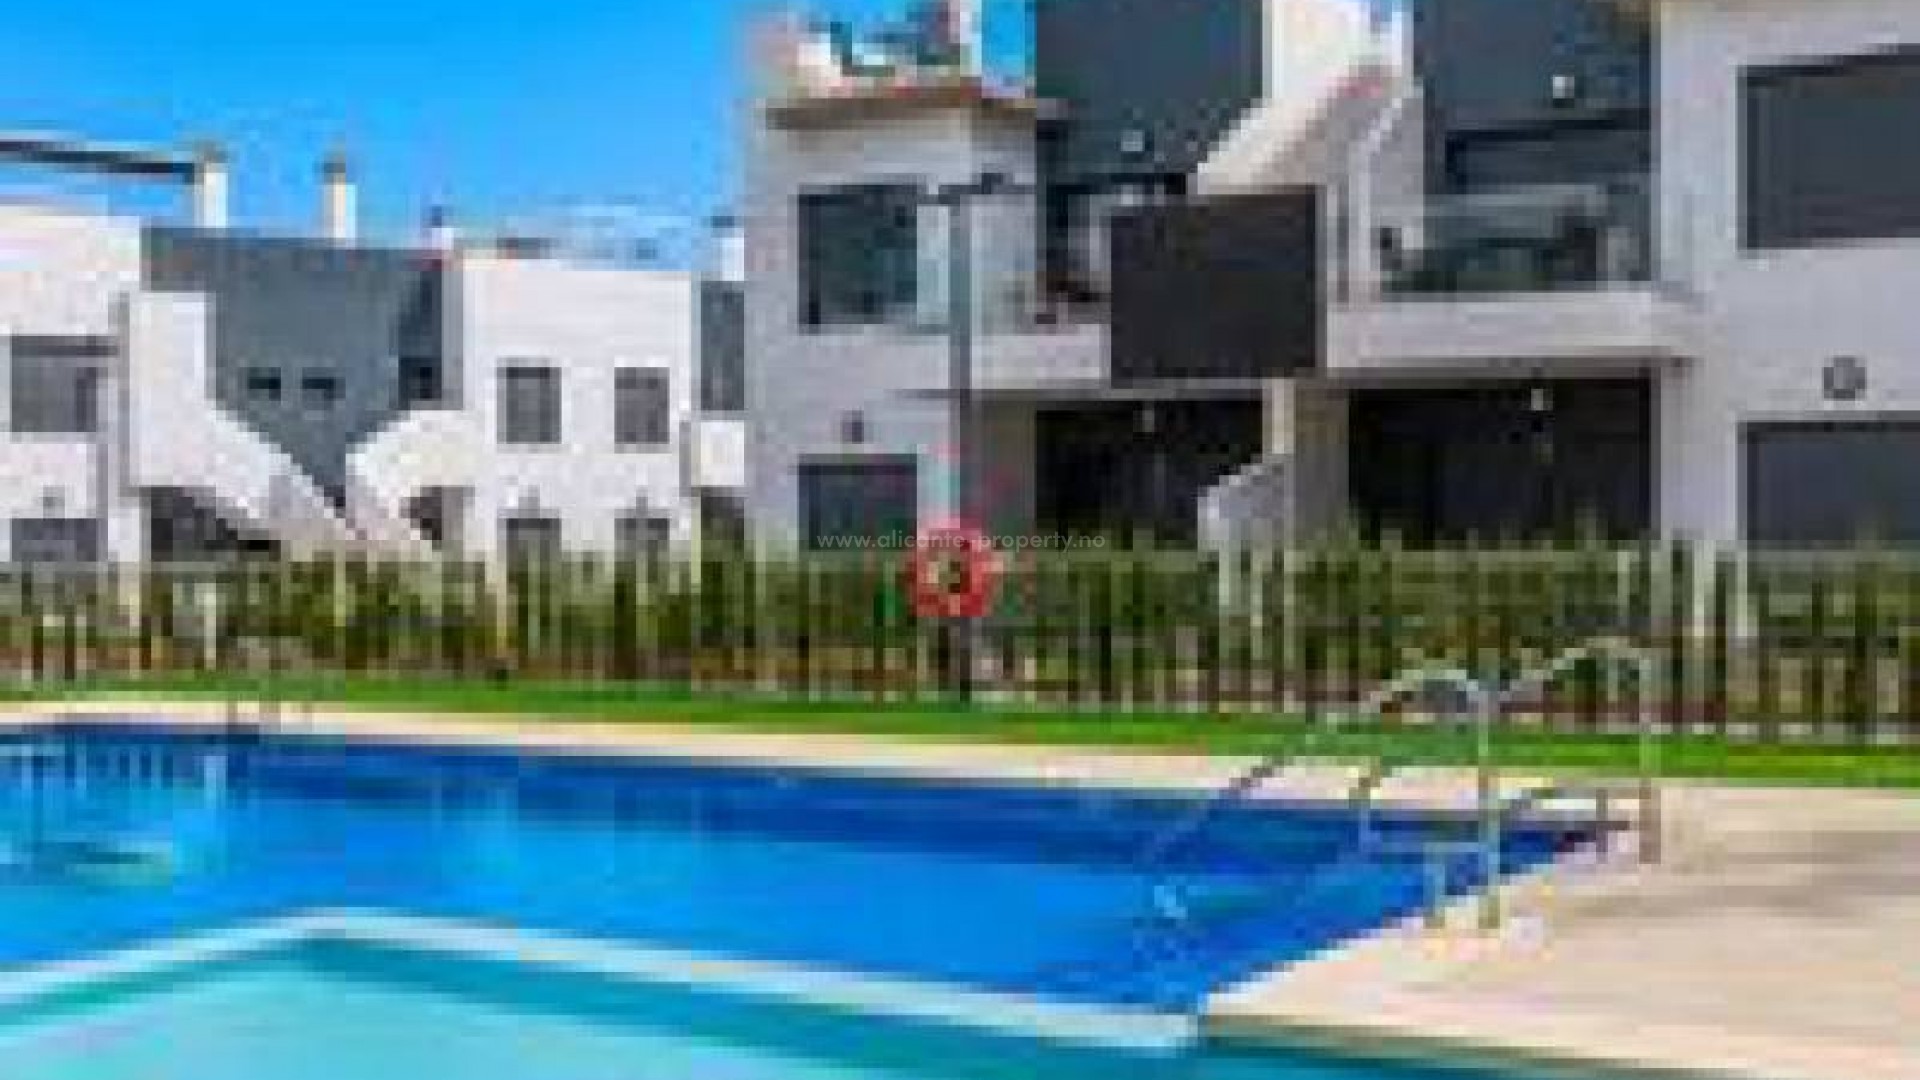 Bungalows available in NEW RESORT in Pilar de la Horadada with 2 bedrooms, 2 bathrooms and a shared pool. Furniture and white goods included.